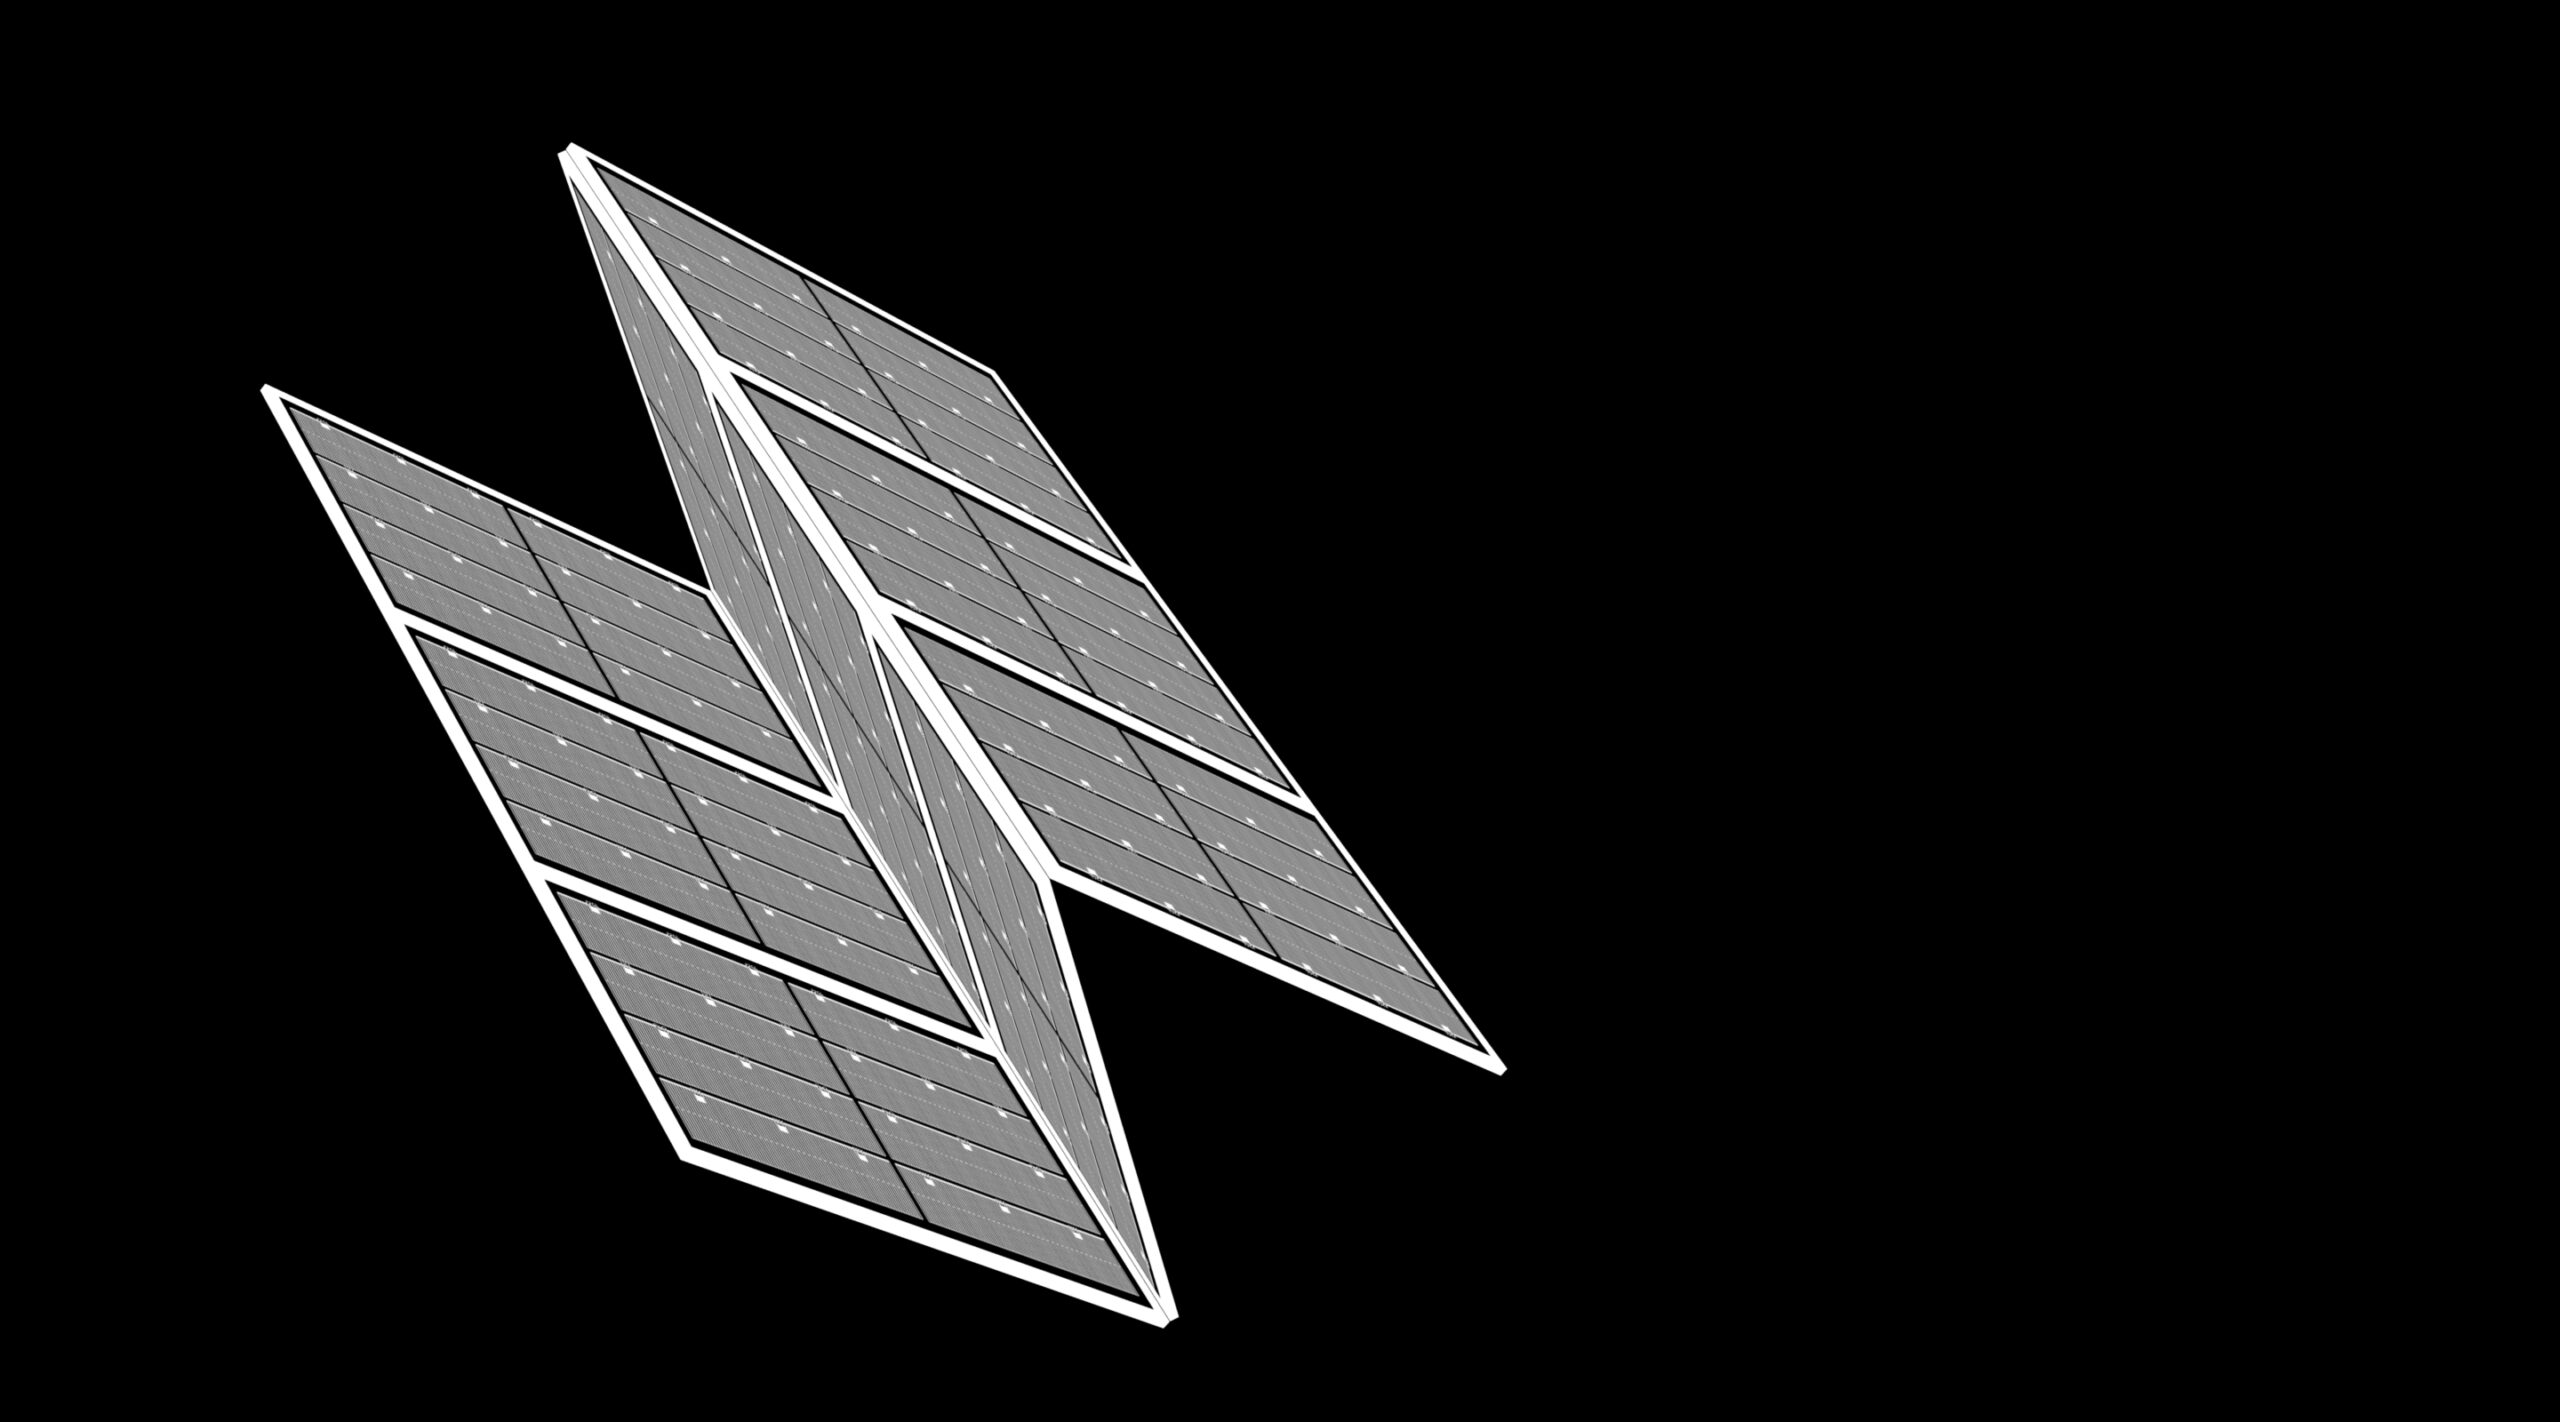 Schematic view of a Z-Folded solar array